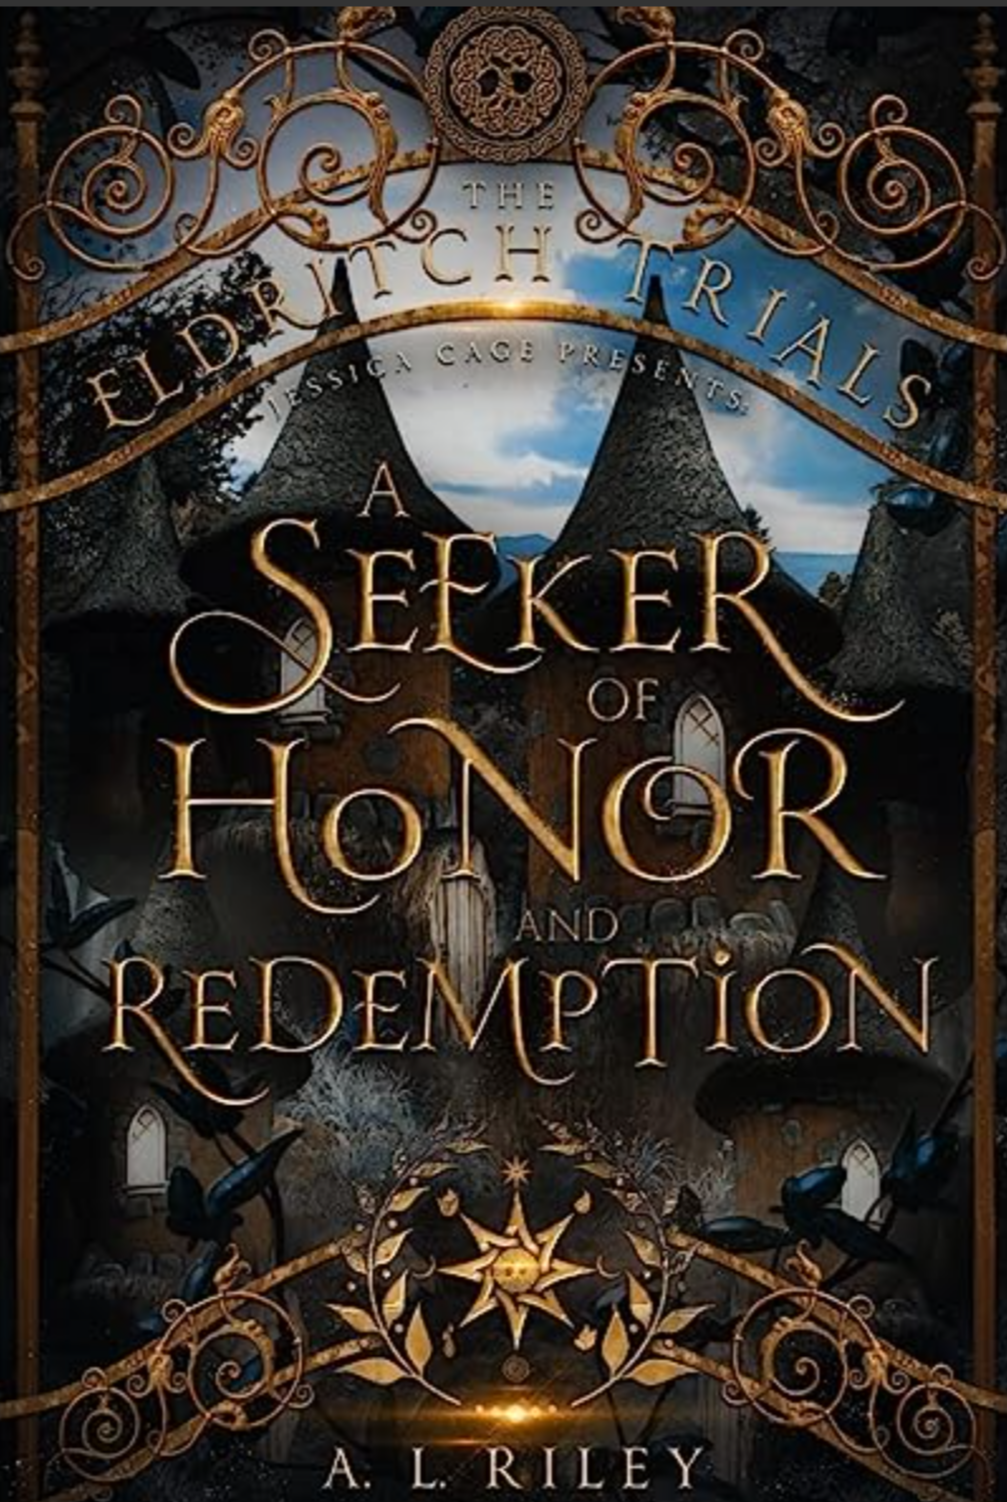 A Seeker of Honor and Redemption